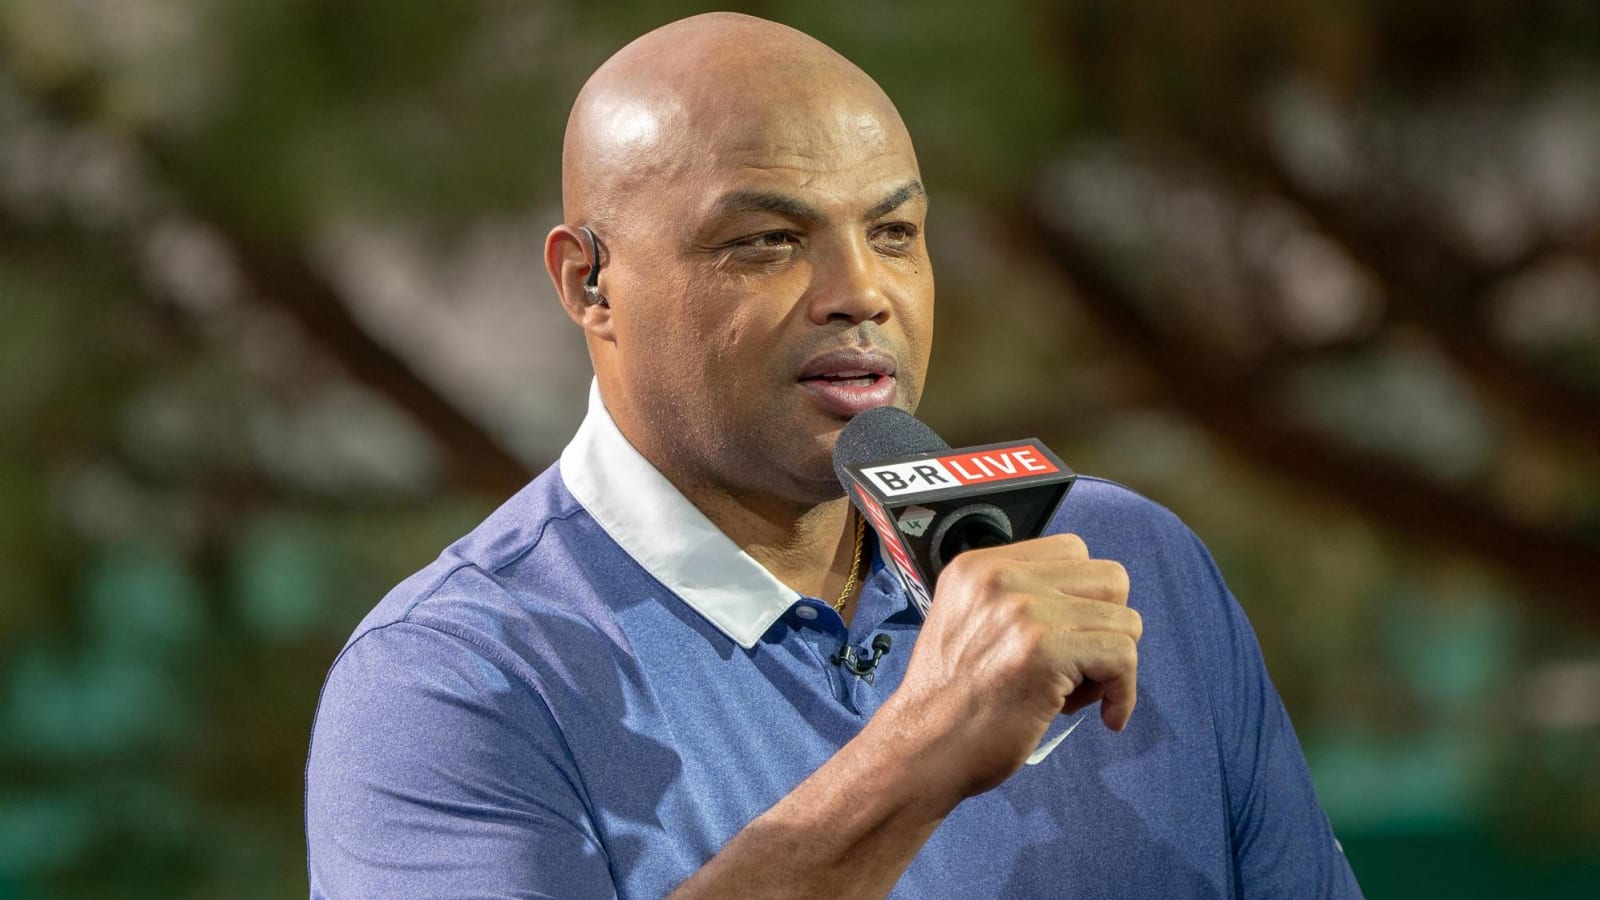 Charles Barkley: Michael Jordan was selective about who he bullied